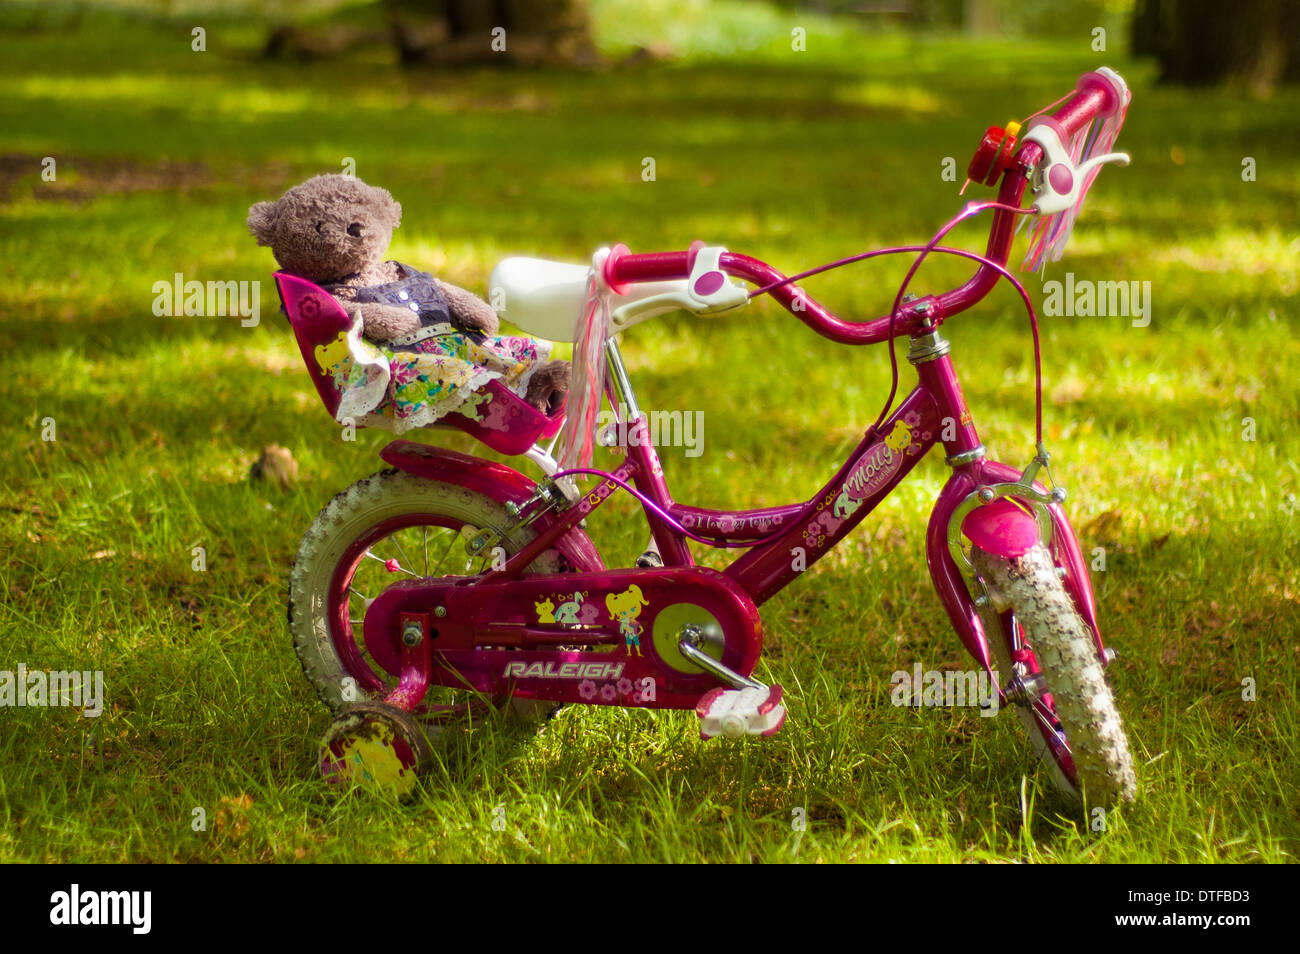 Teddy sitting on a girl's pink bike on a grassy meadow Stock Photo